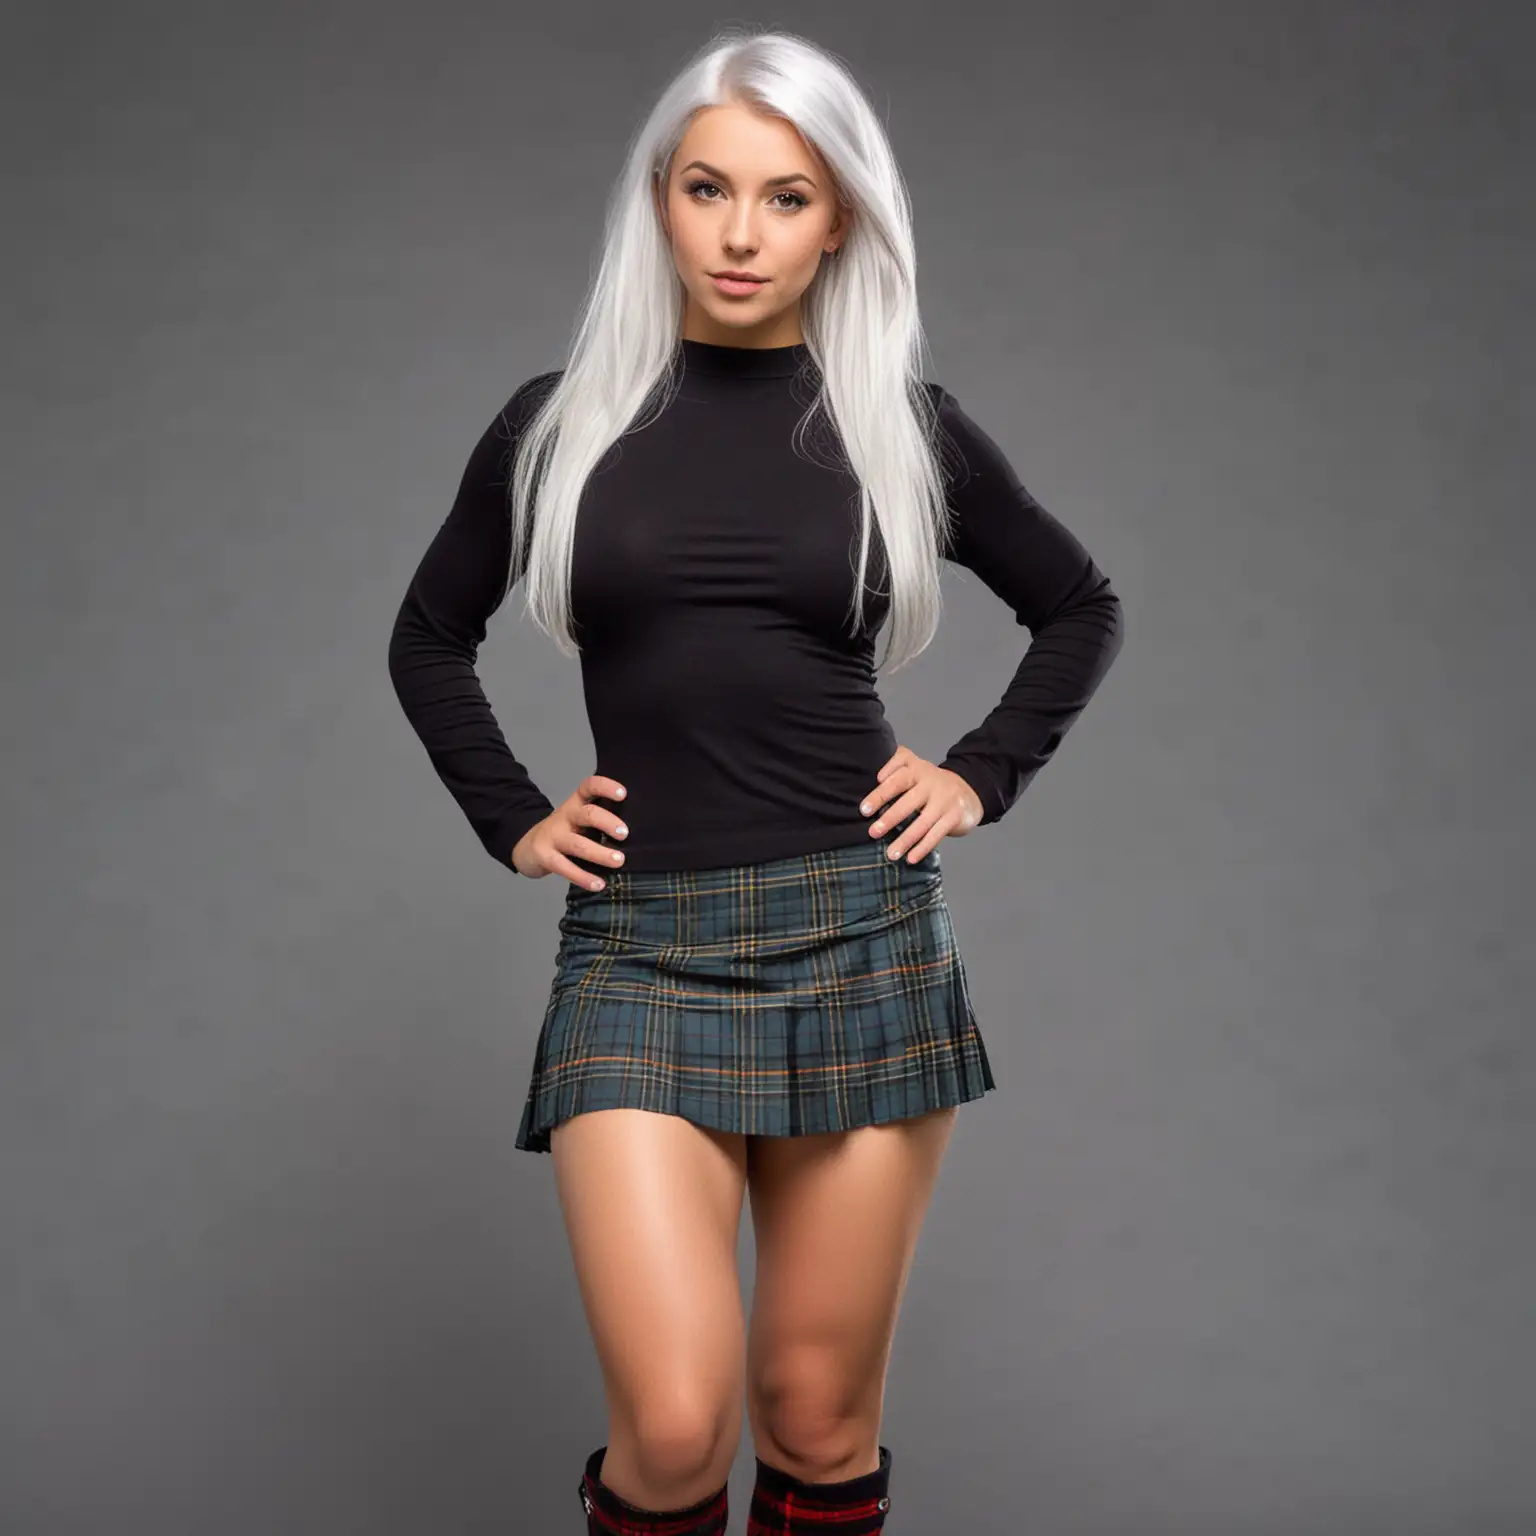 Sultry Woman in Miniskirt and Kilted Silvery Hair